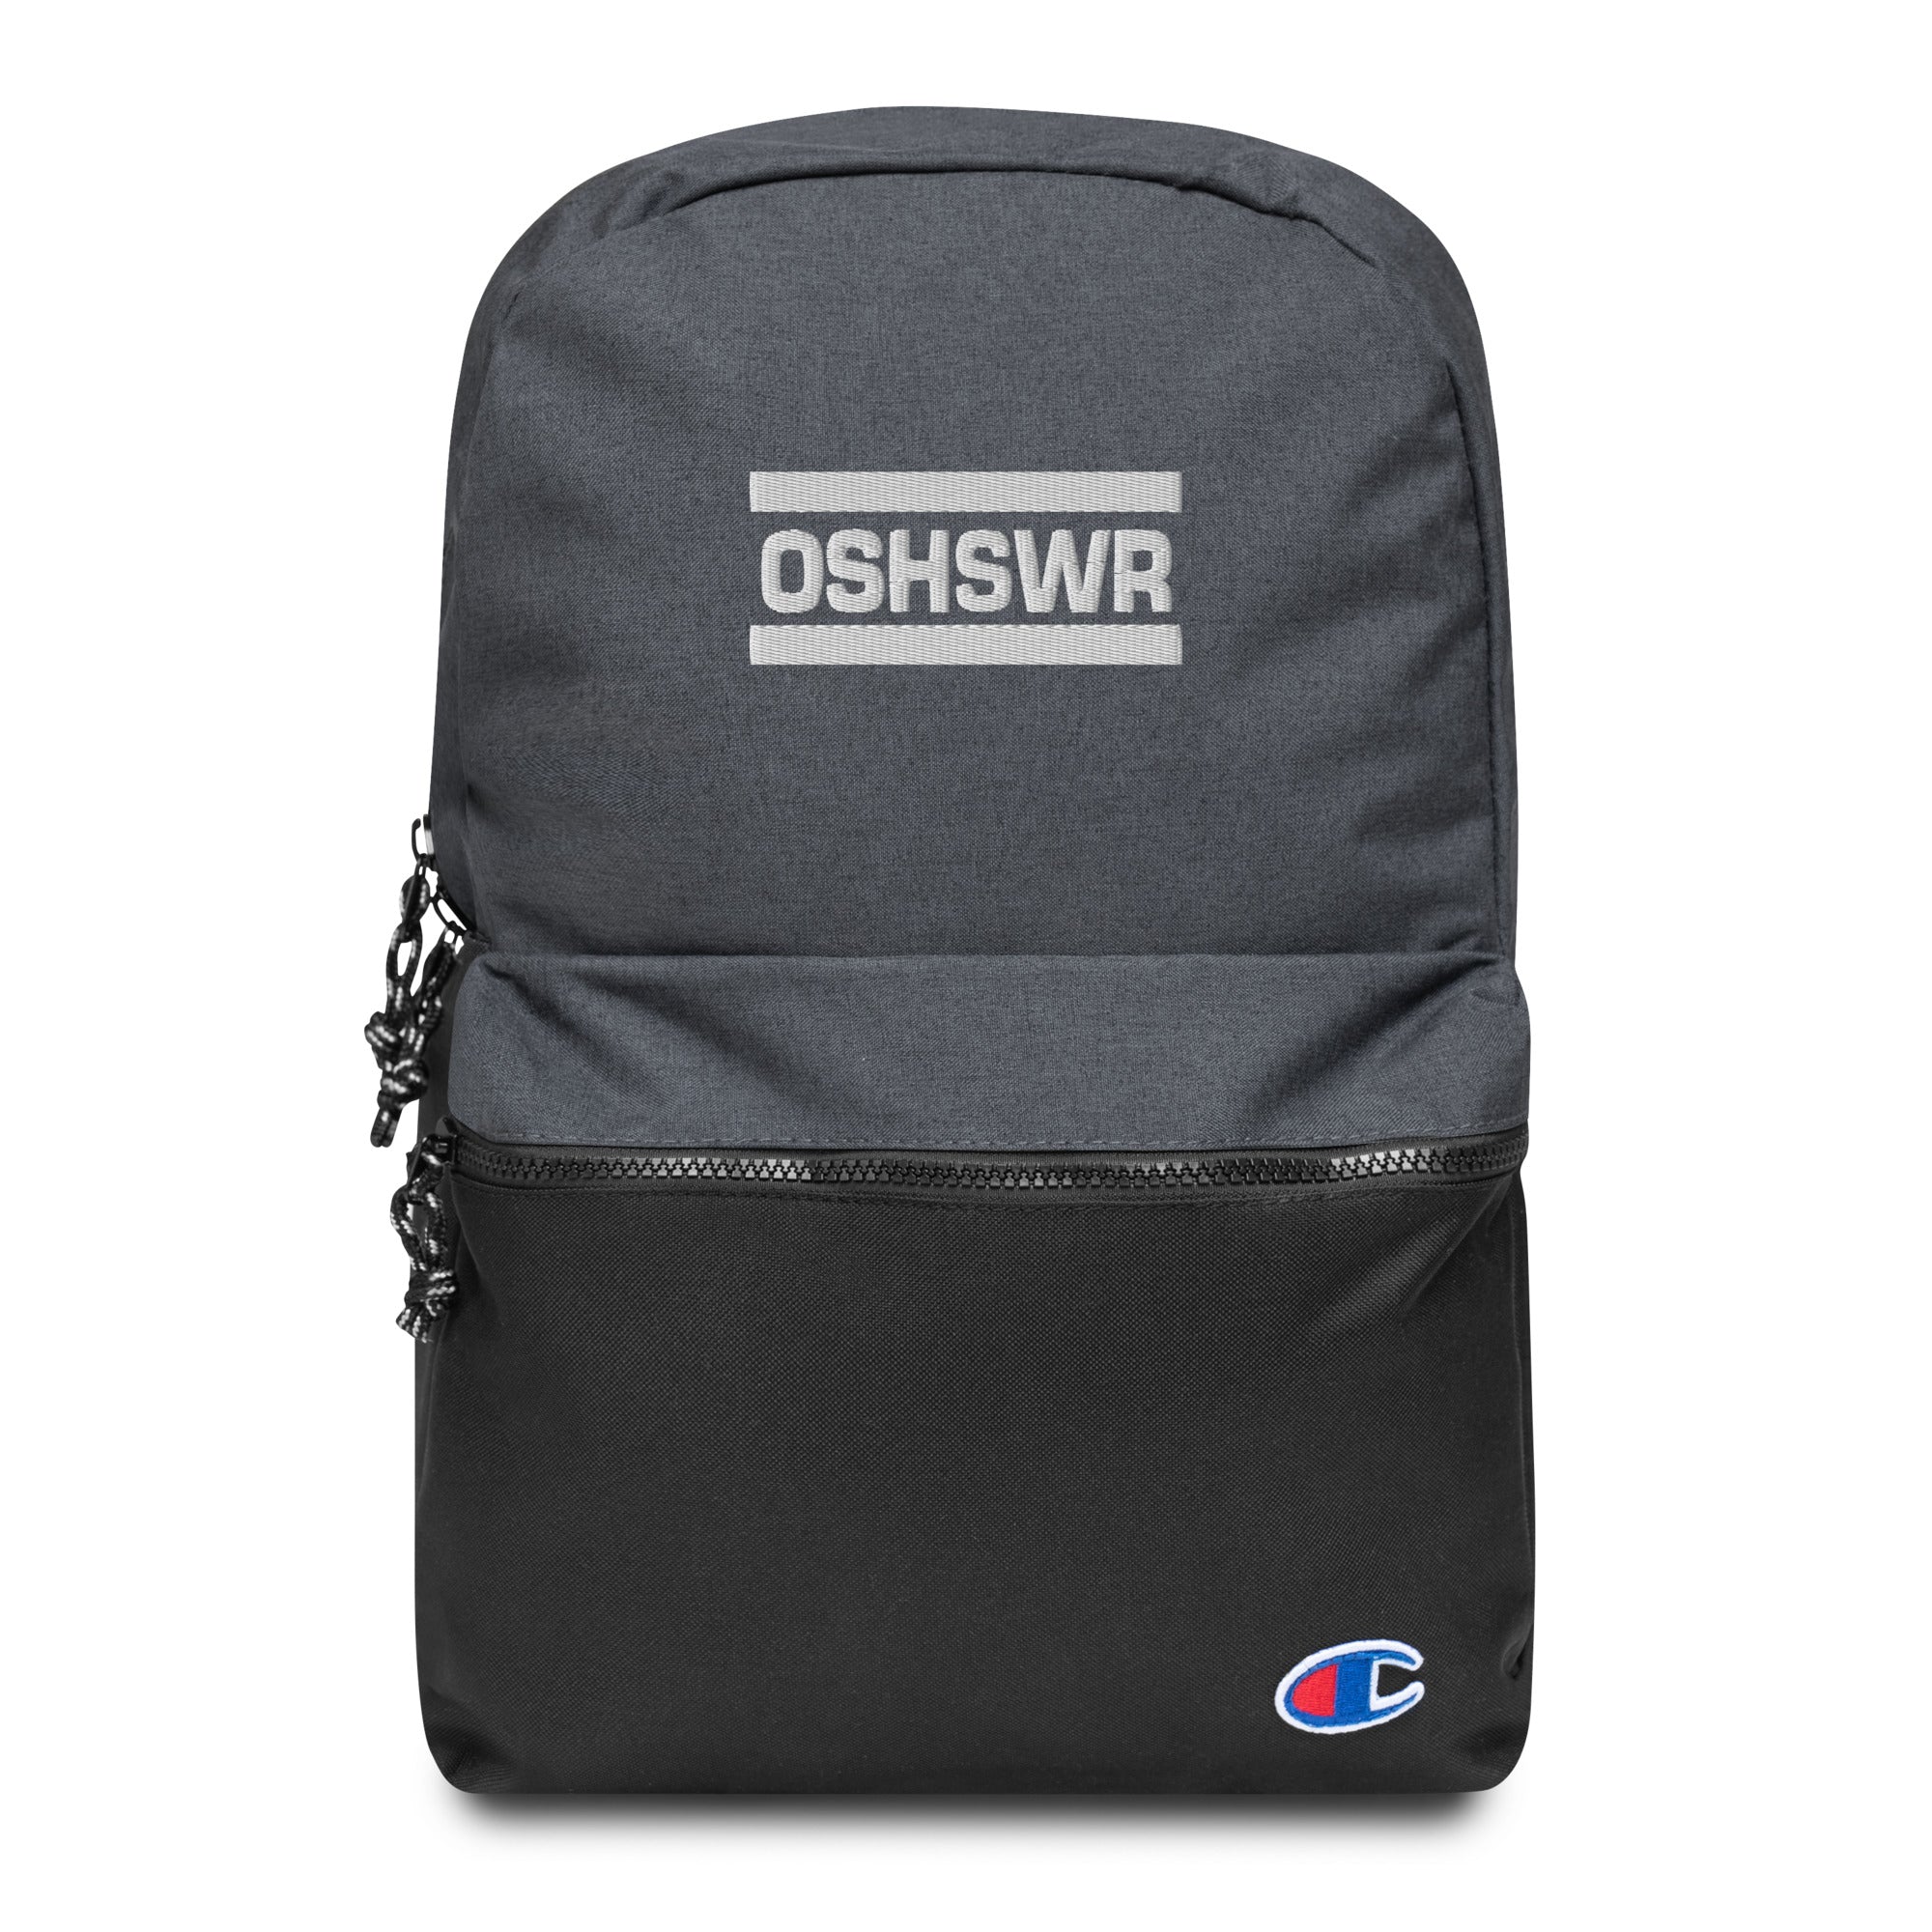 OSHSWR Embroidered Champion Backpack